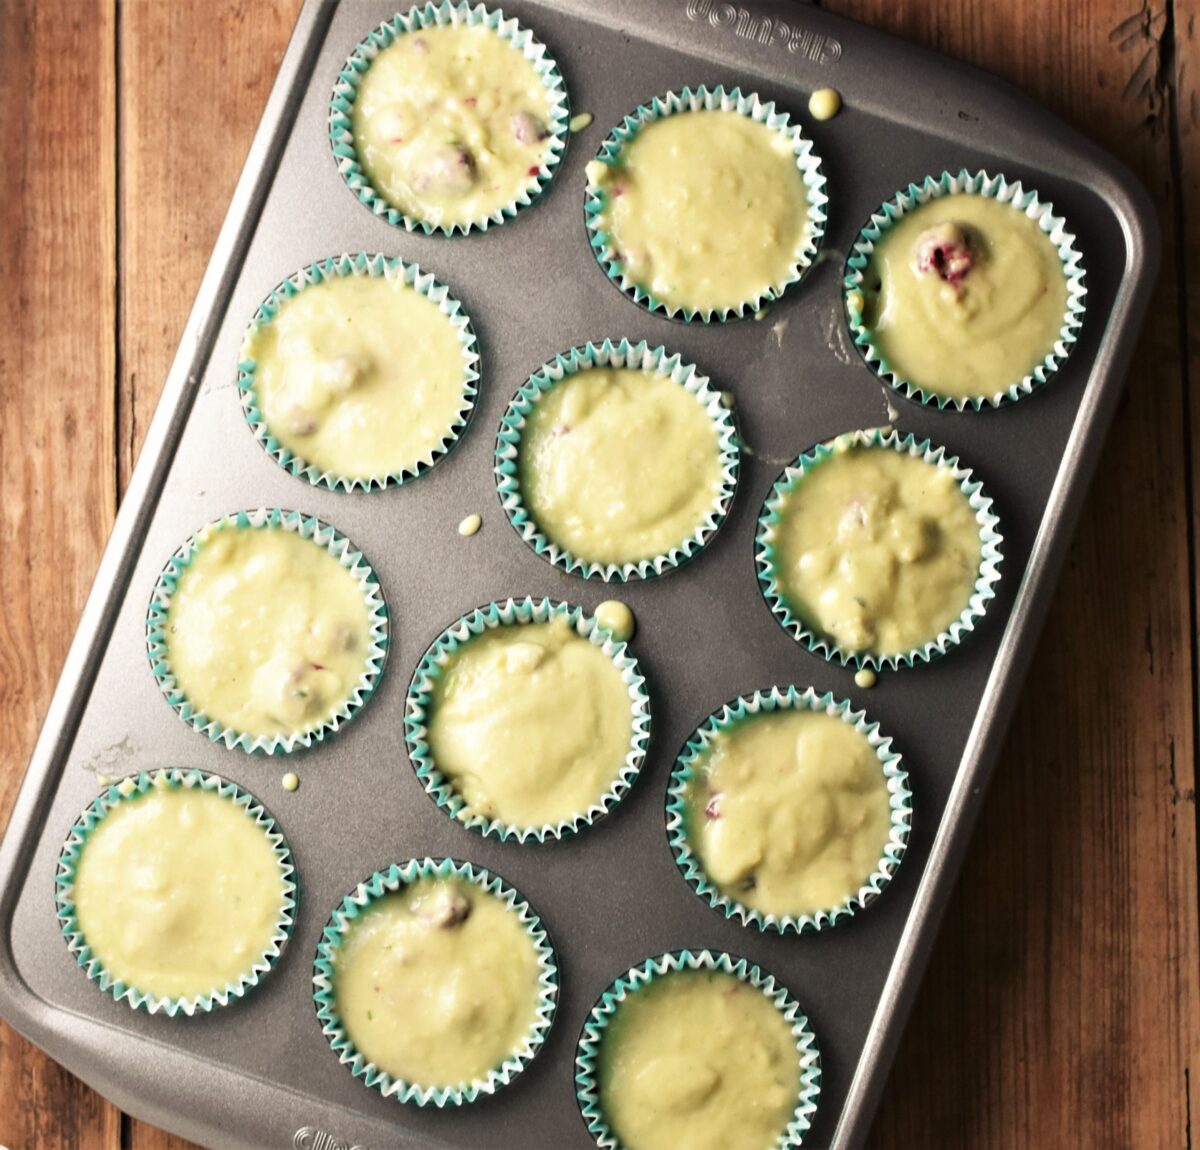 Muffin batter in 12 green muffin cases in pan.